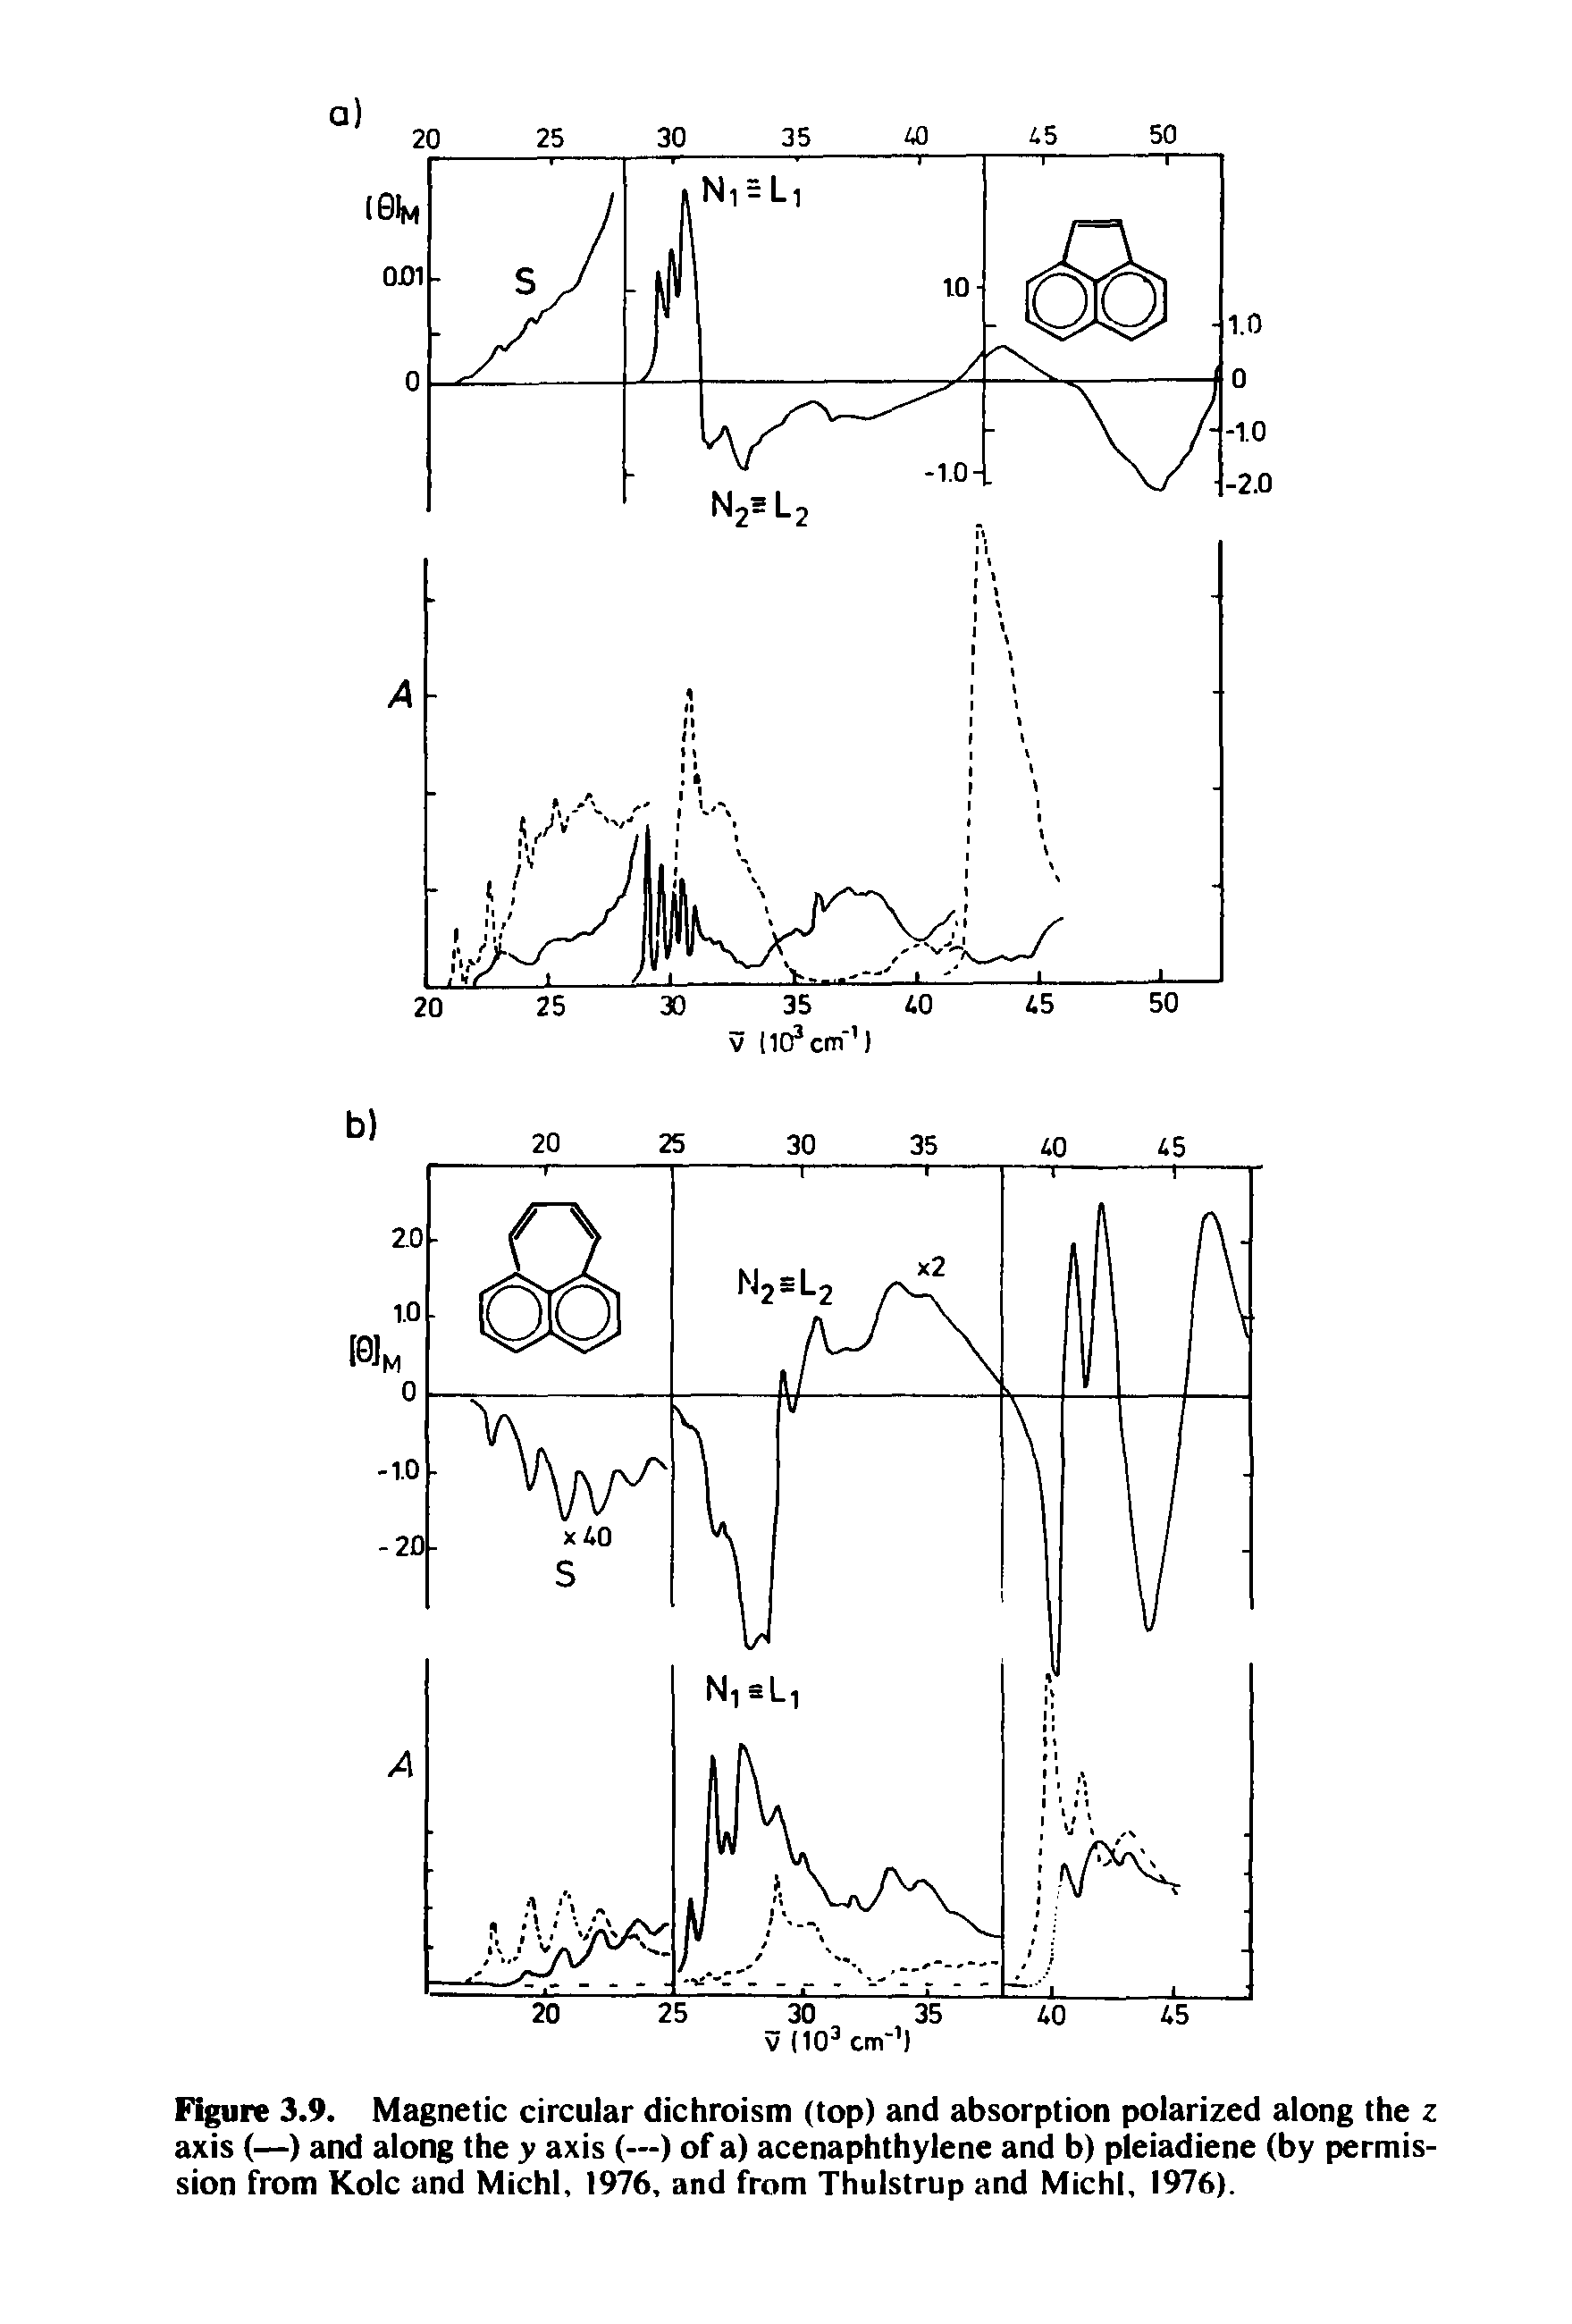 Figure 3.9. Magnetic circular dichroism (top) and absorption polarized along the z axis (—) and along the y axis (—) of a) acenaphthylene and b) pleiadiene (by permission from Kolc and Michl, 1976, and from Thulstrup and Michl, 1976).